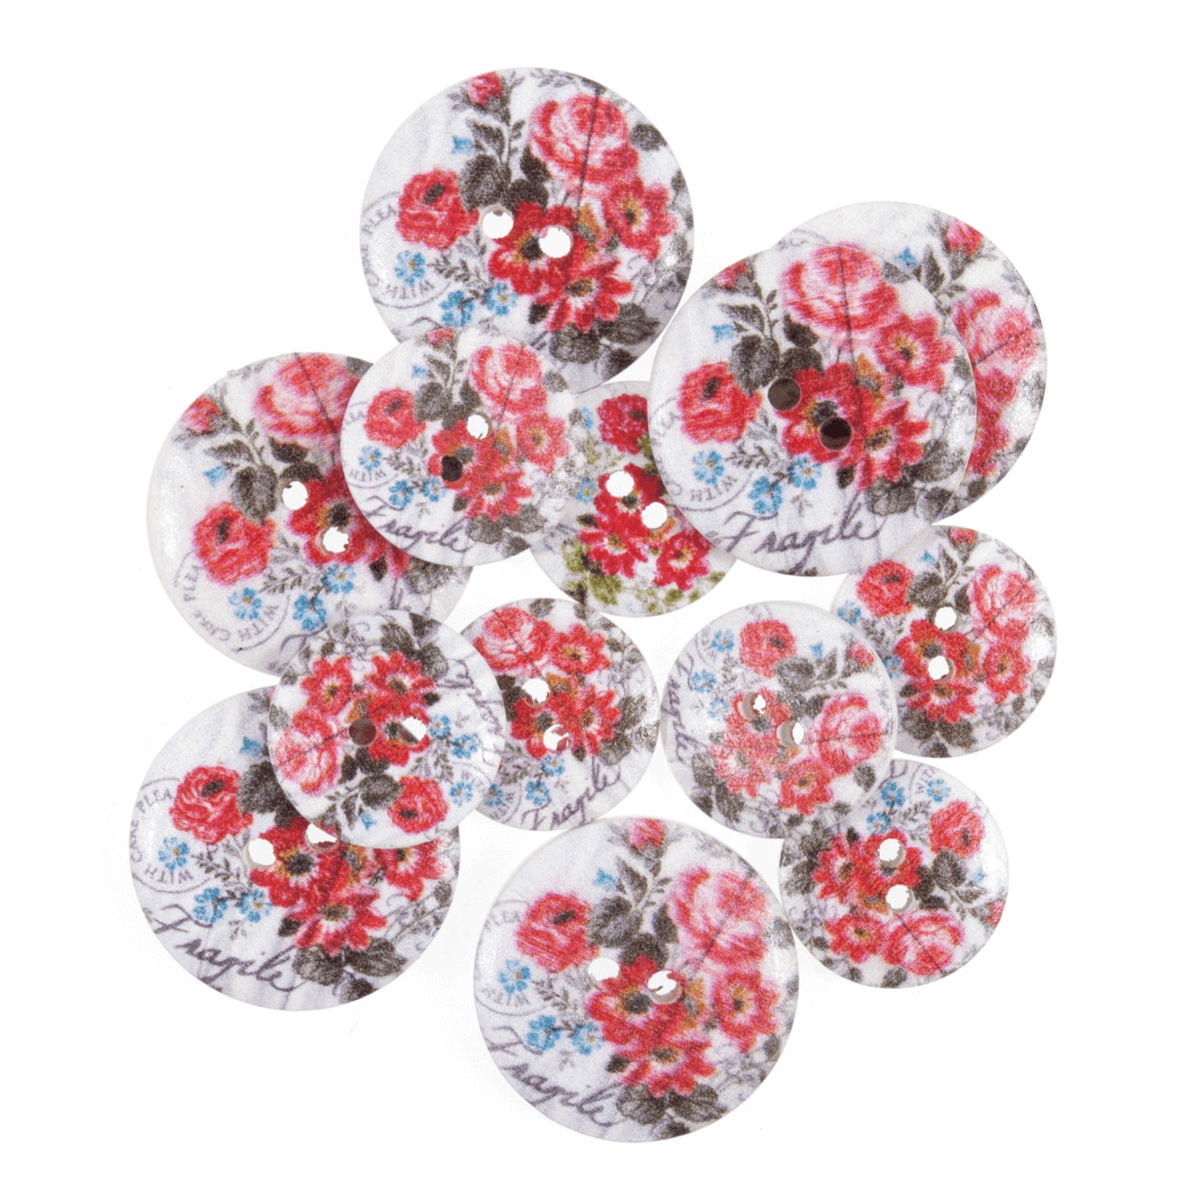 15 x Assorted Lace Rose Wooden Craft Buttons 18mm - 25mm 